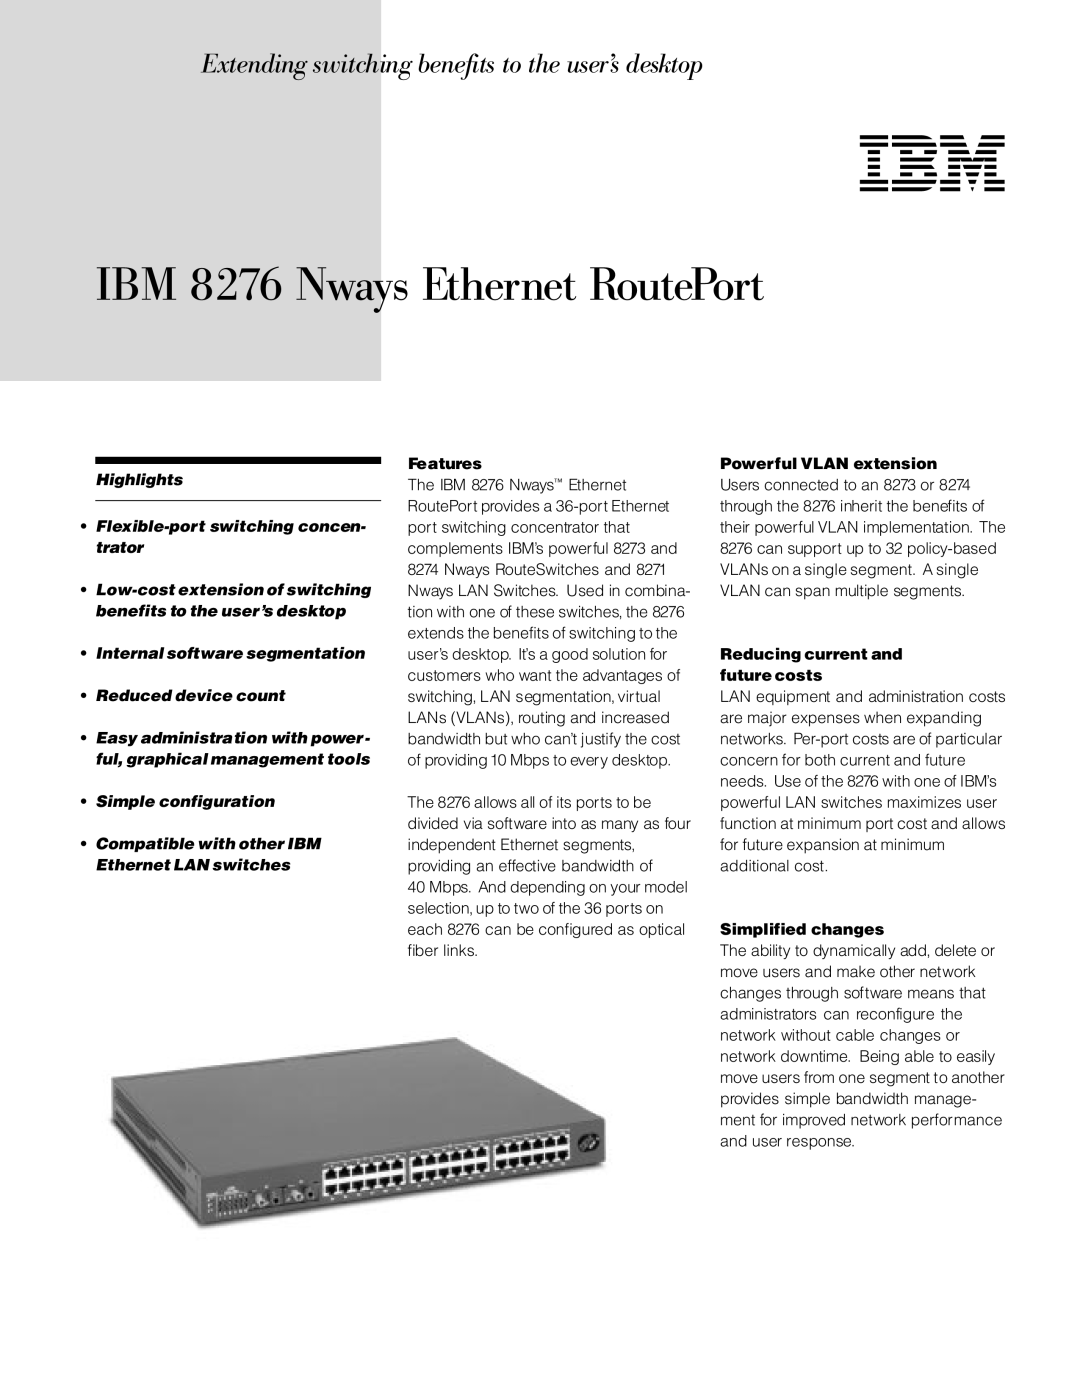 IBM 8276 manual Features, Powerful VLAN extension, Reducing current and future costs, Simplified changes 